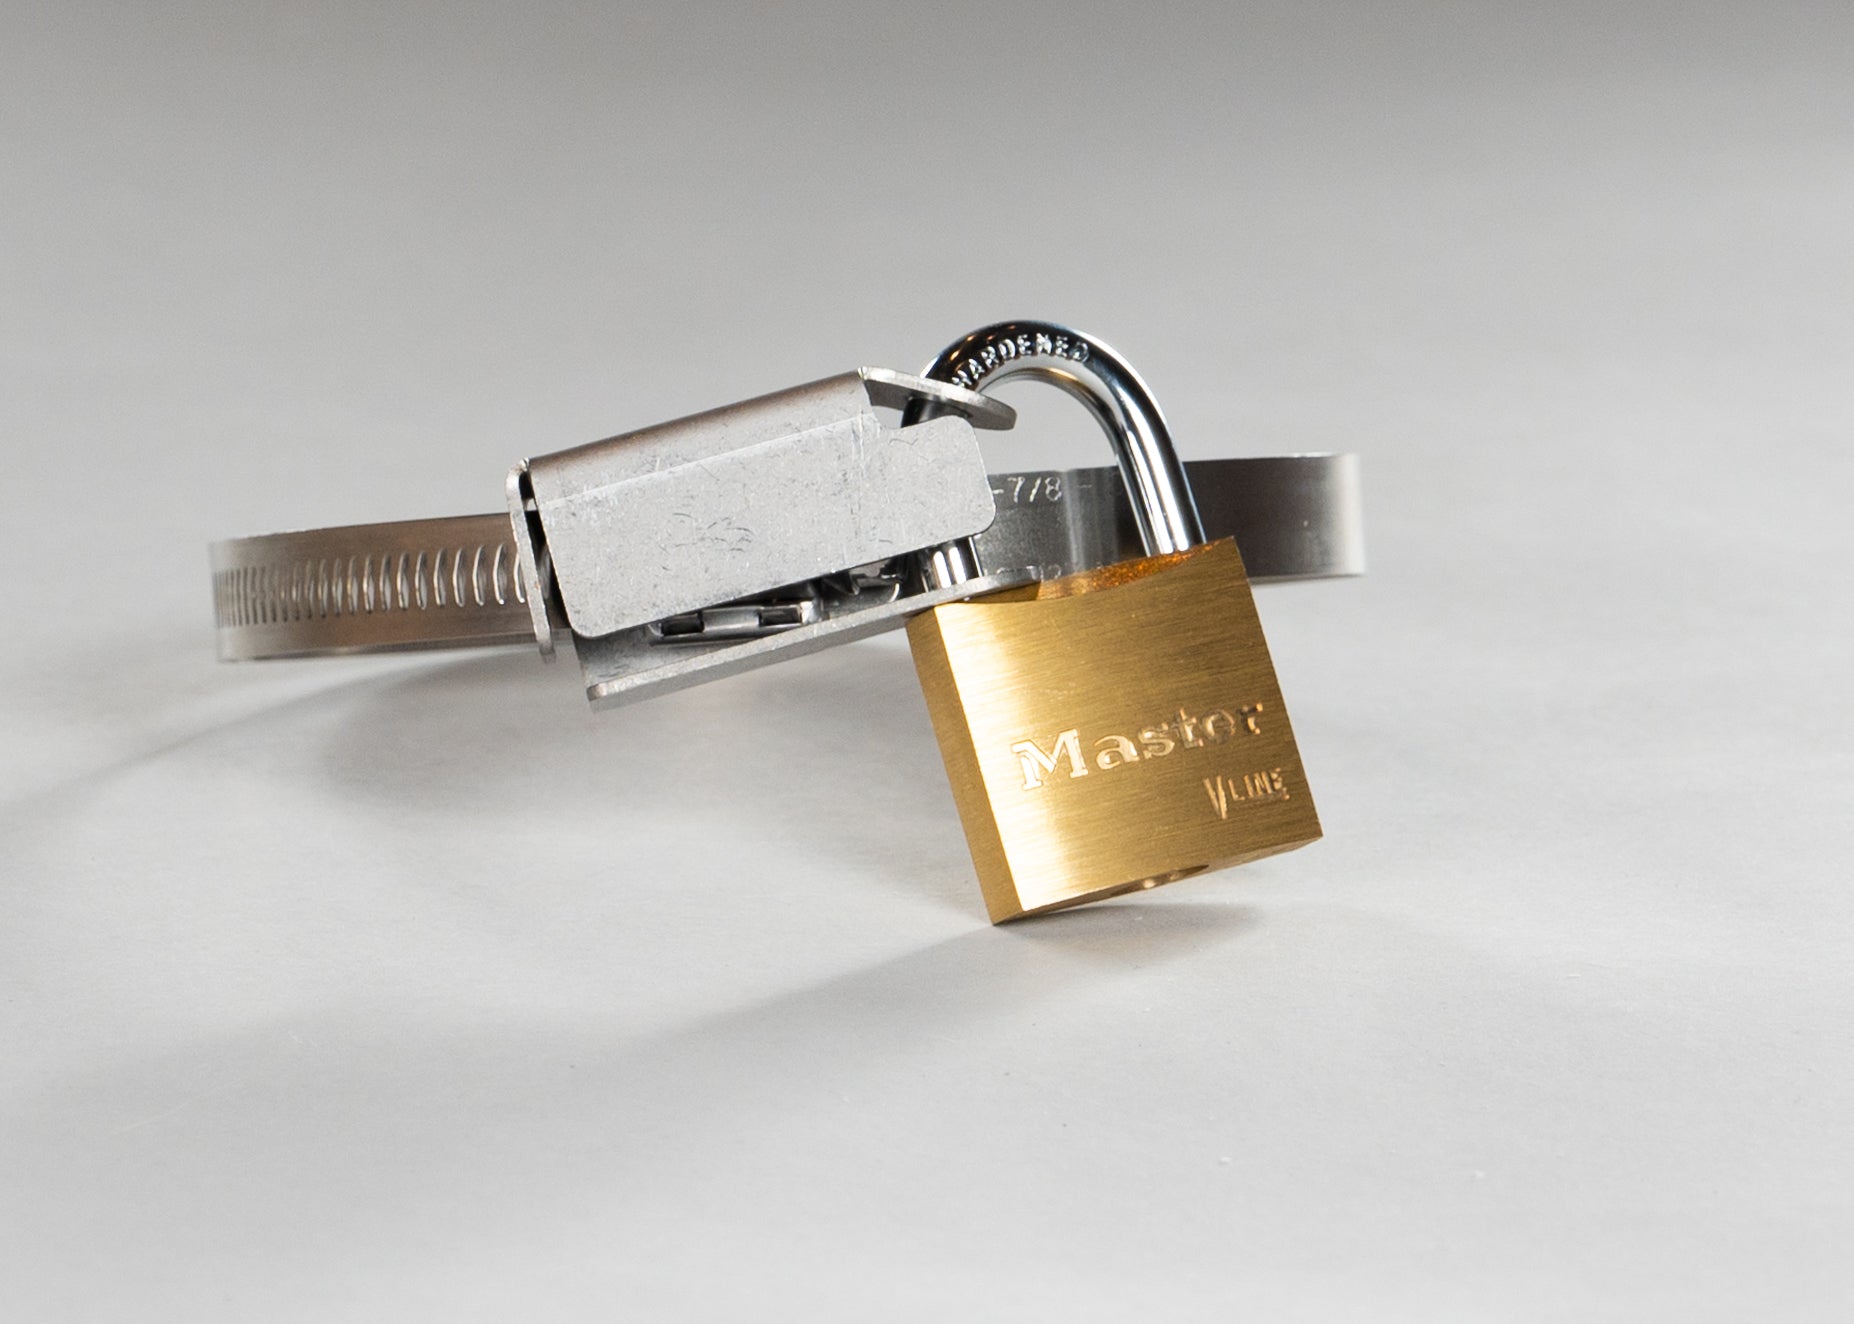 The full hose clamp lock bracket system as used in the field. A gold padlock is installed through the holes of the lock bracket preventing access to the hex driver of the hose clamp